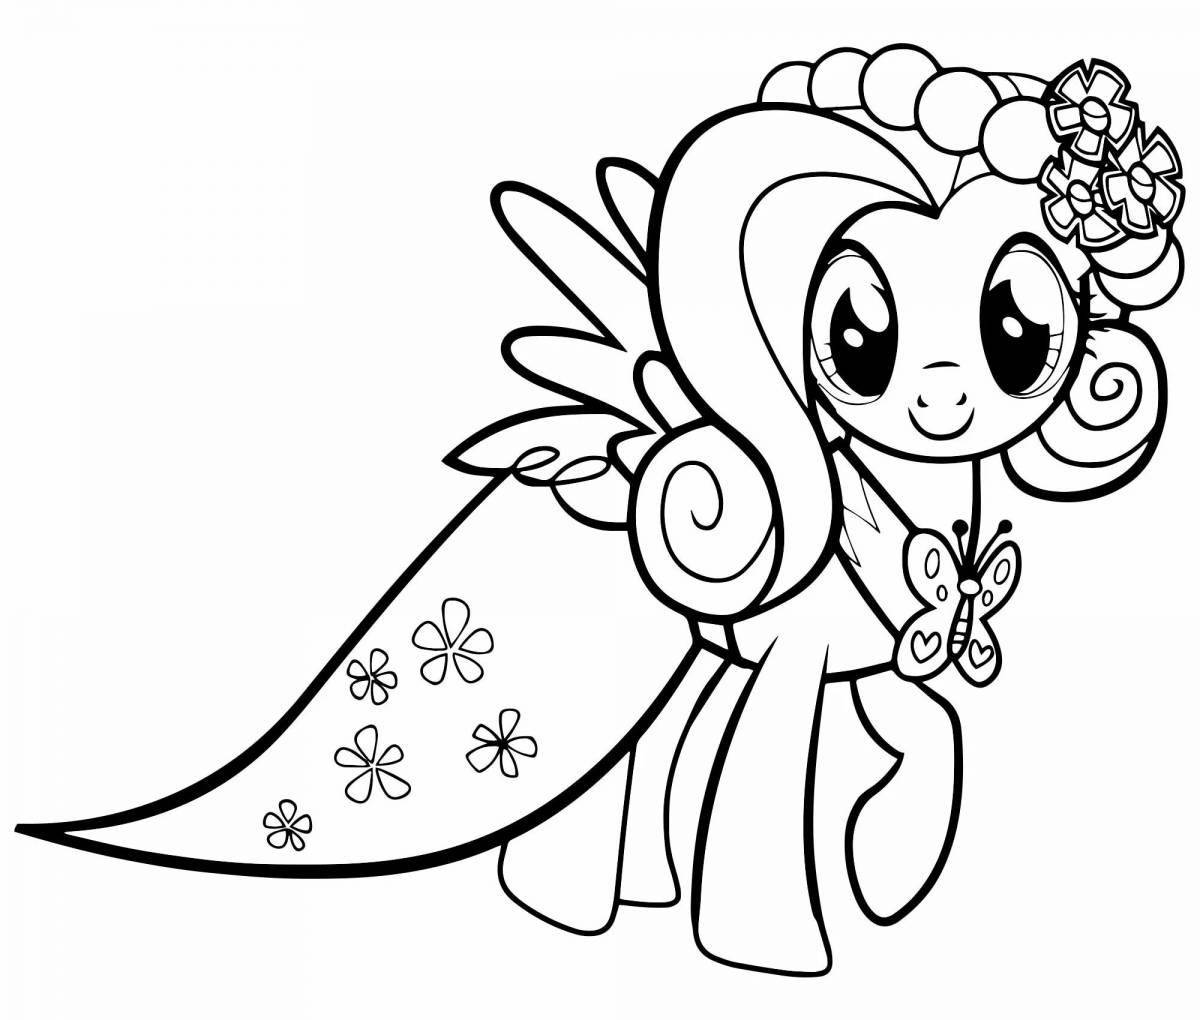 Great ponyville pony coloring book